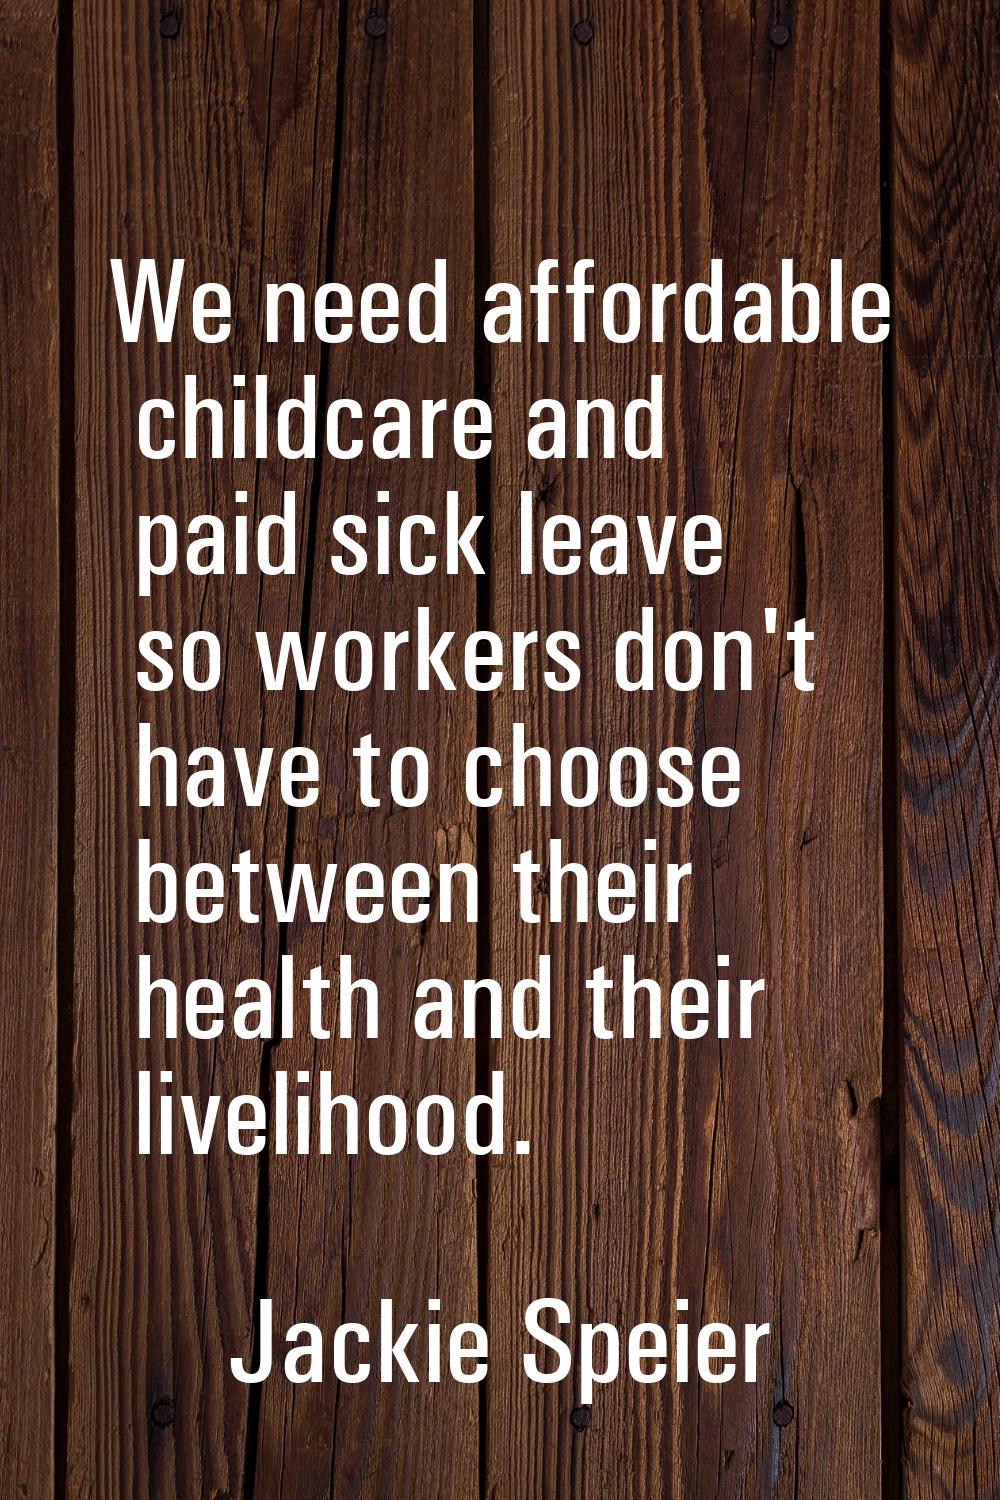 We need affordable childcare and paid sick leave so workers don't have to choose between their heal